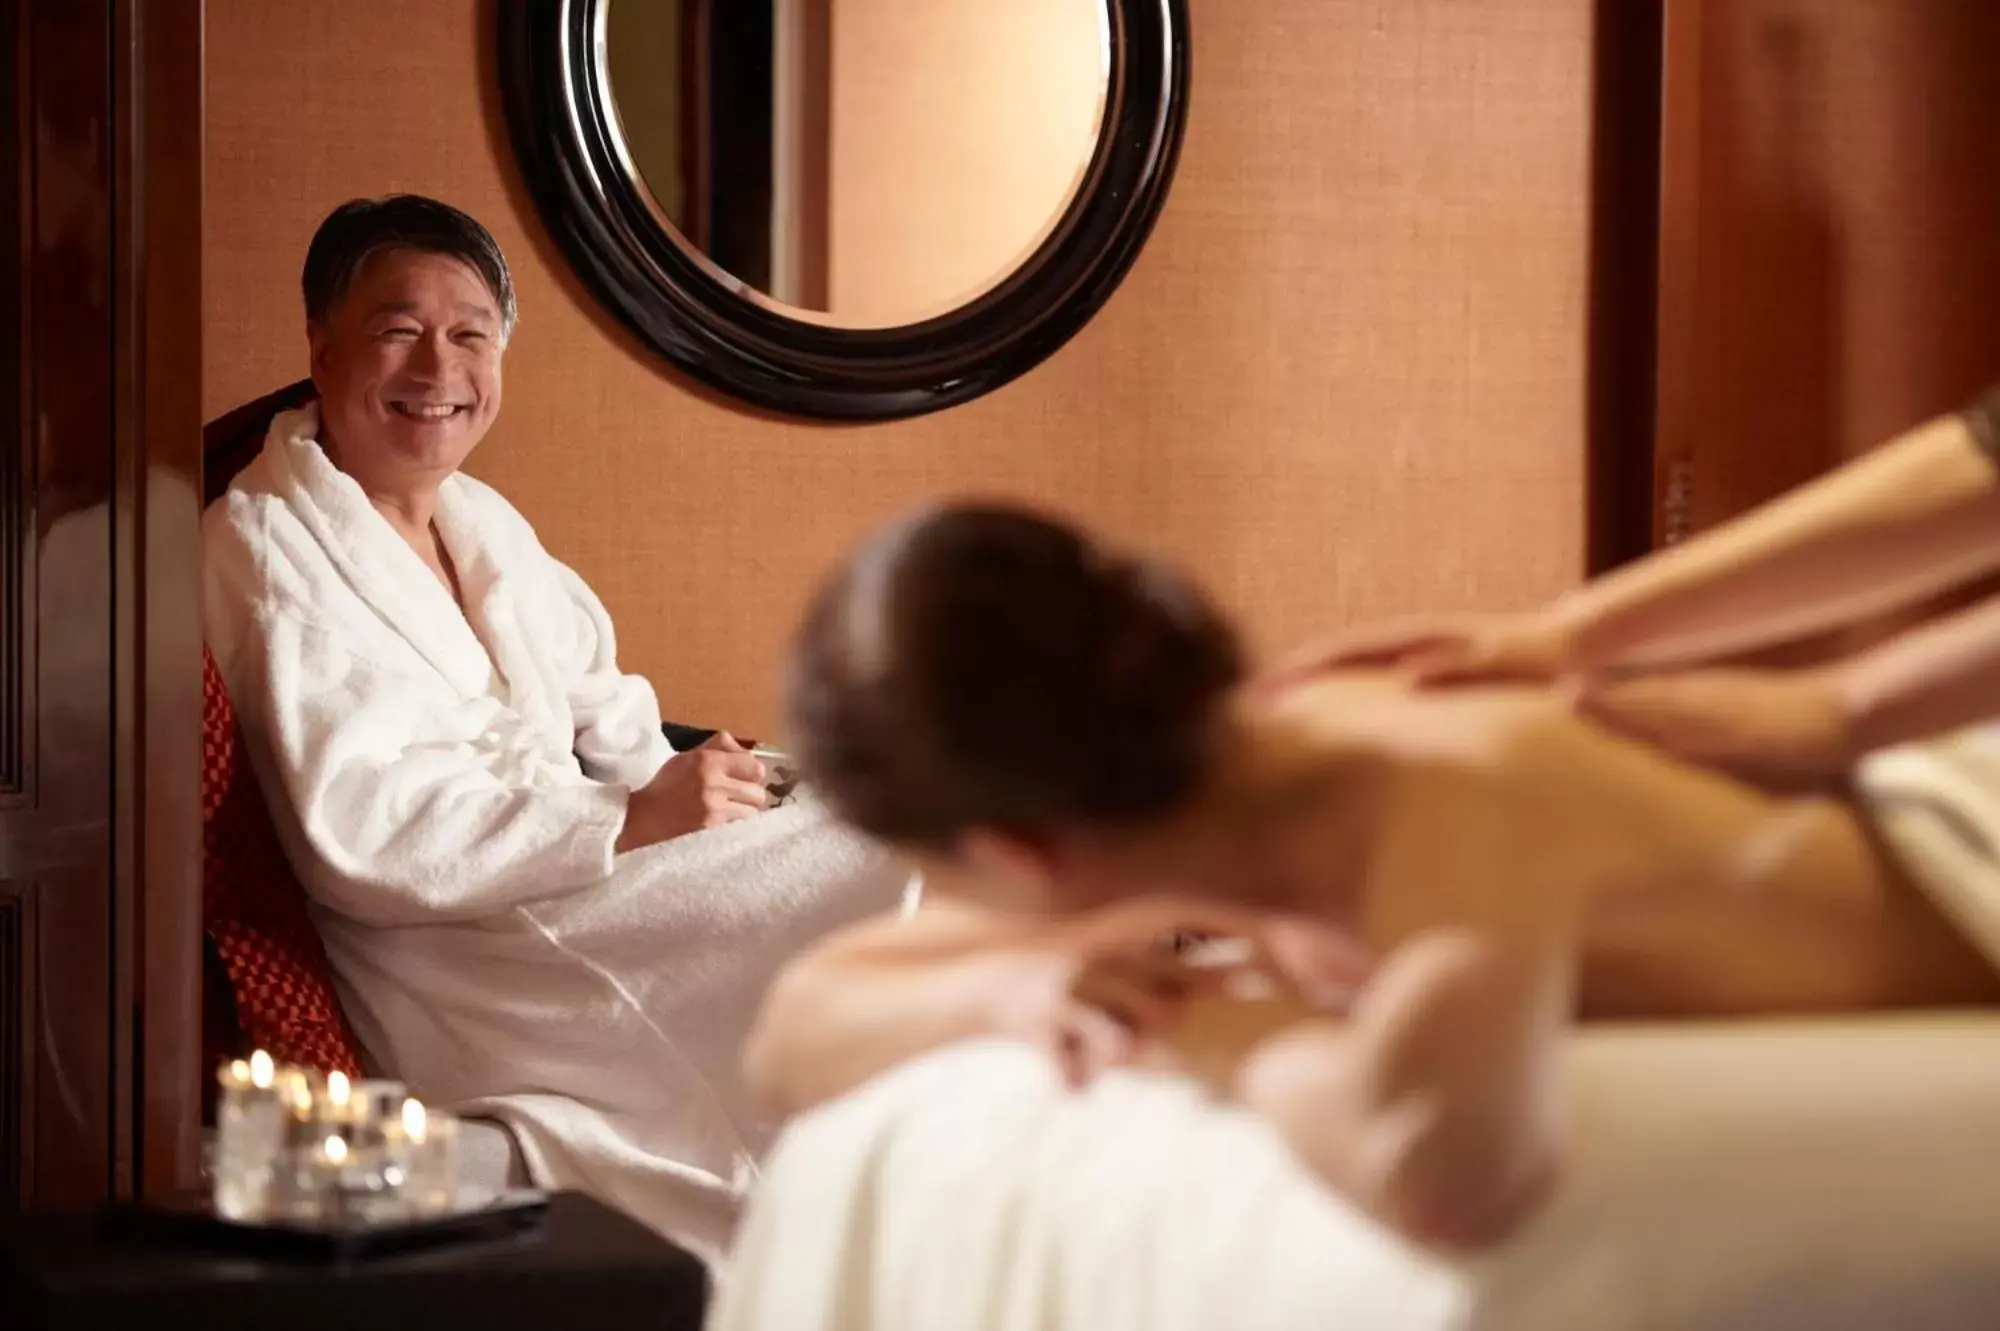 Massage in Fairmont Peace Hotel On the Bund (Start your own story with the BUND)